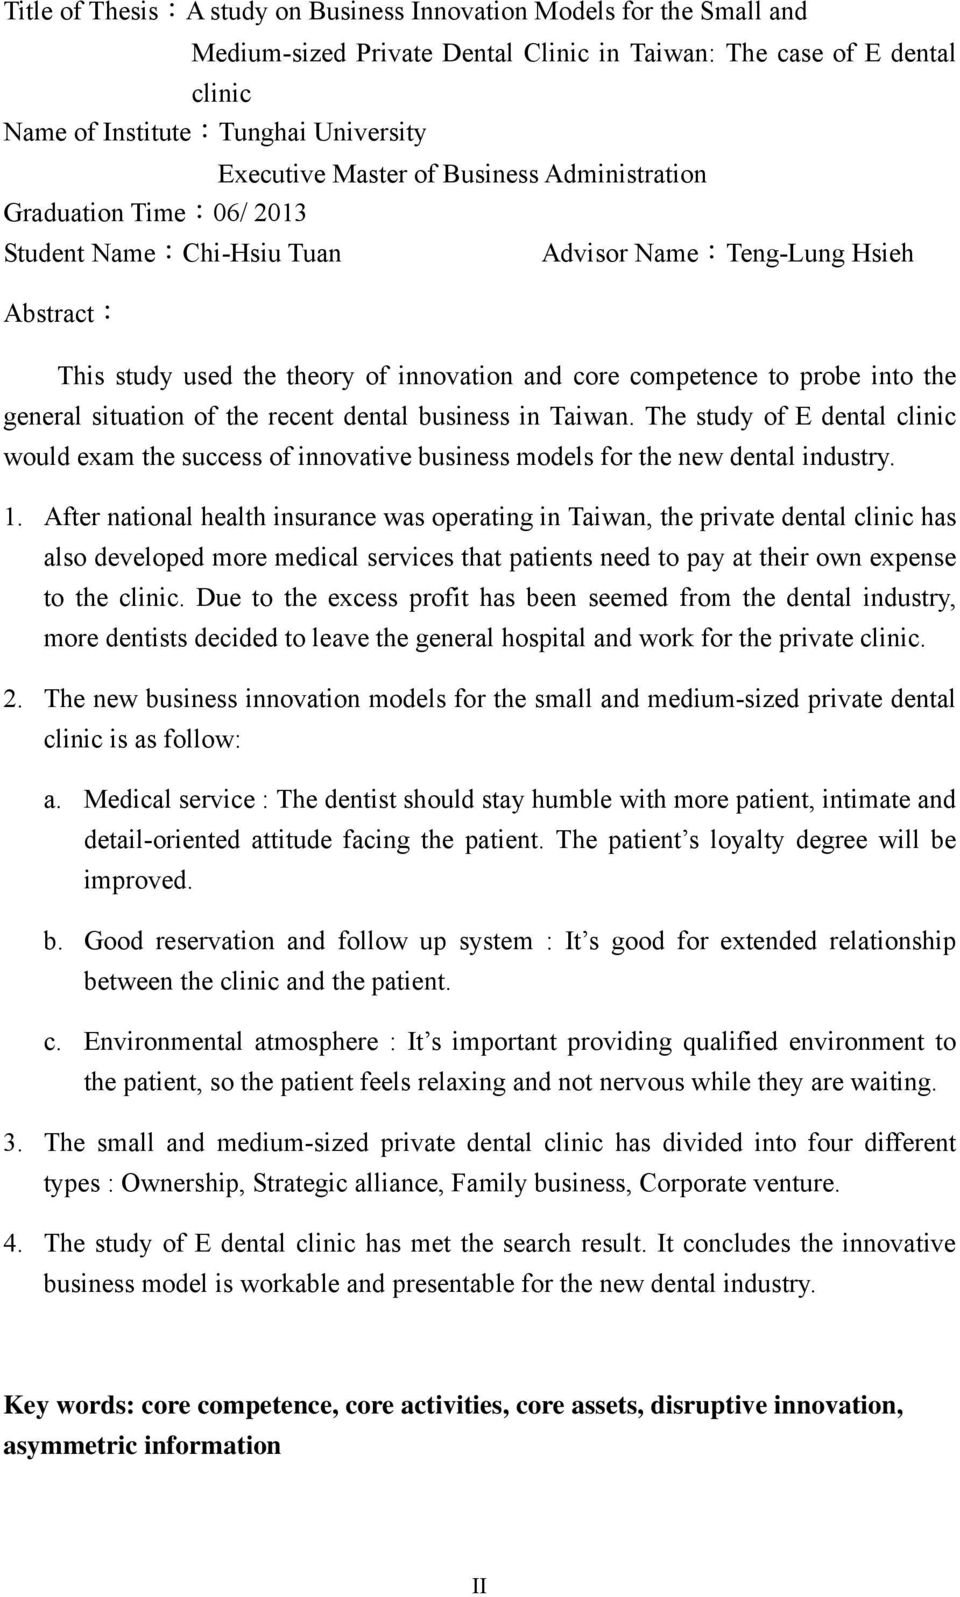 general situation of the recent dental business in Taiwan. The study of E dental clinic would exam the success of innovative business models for the new dental industry. 1.